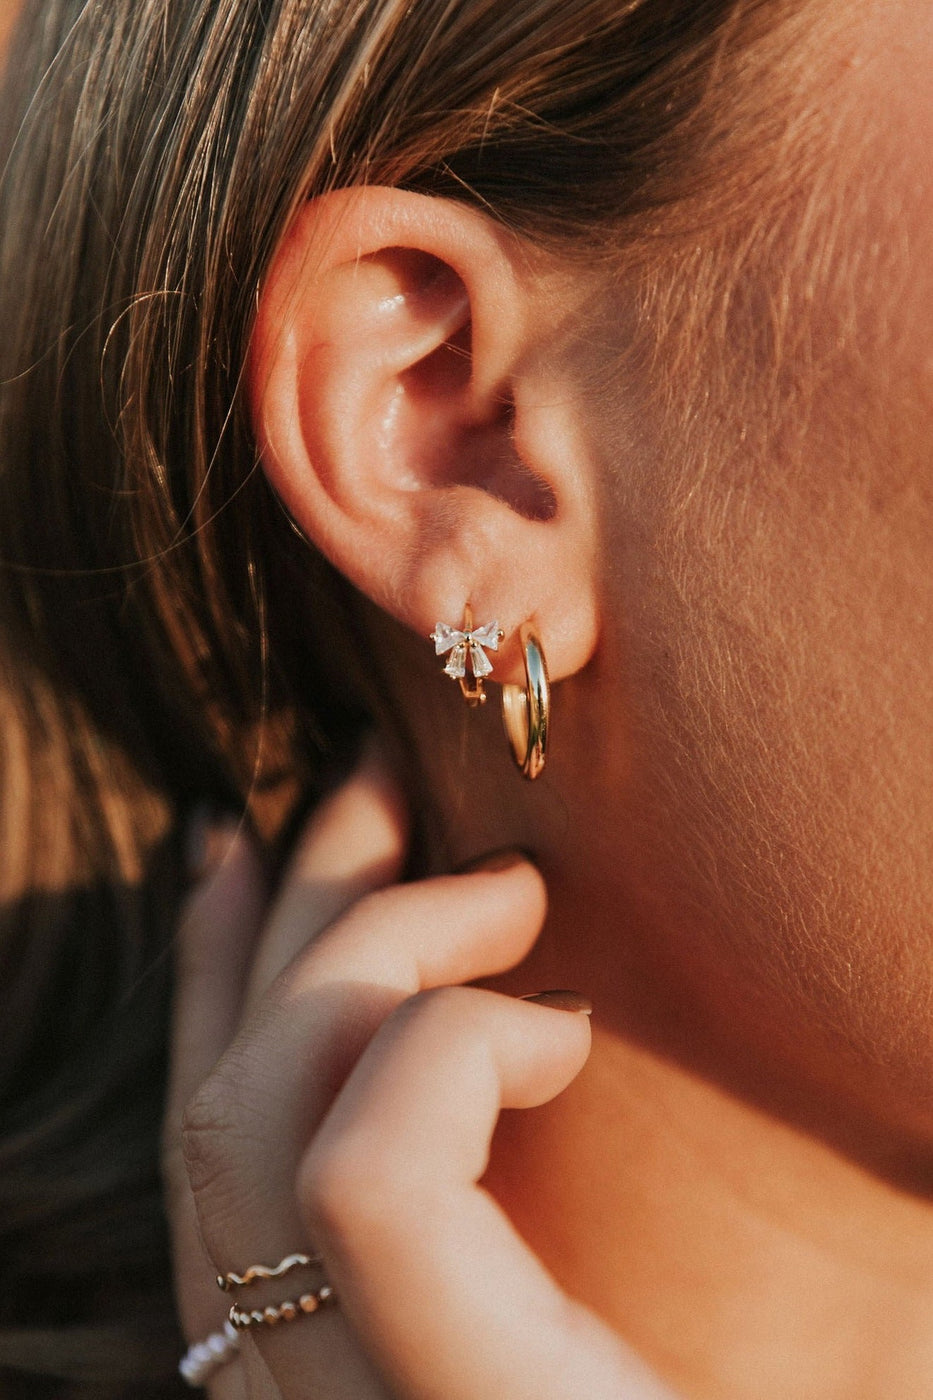 a close up of a woman's ear